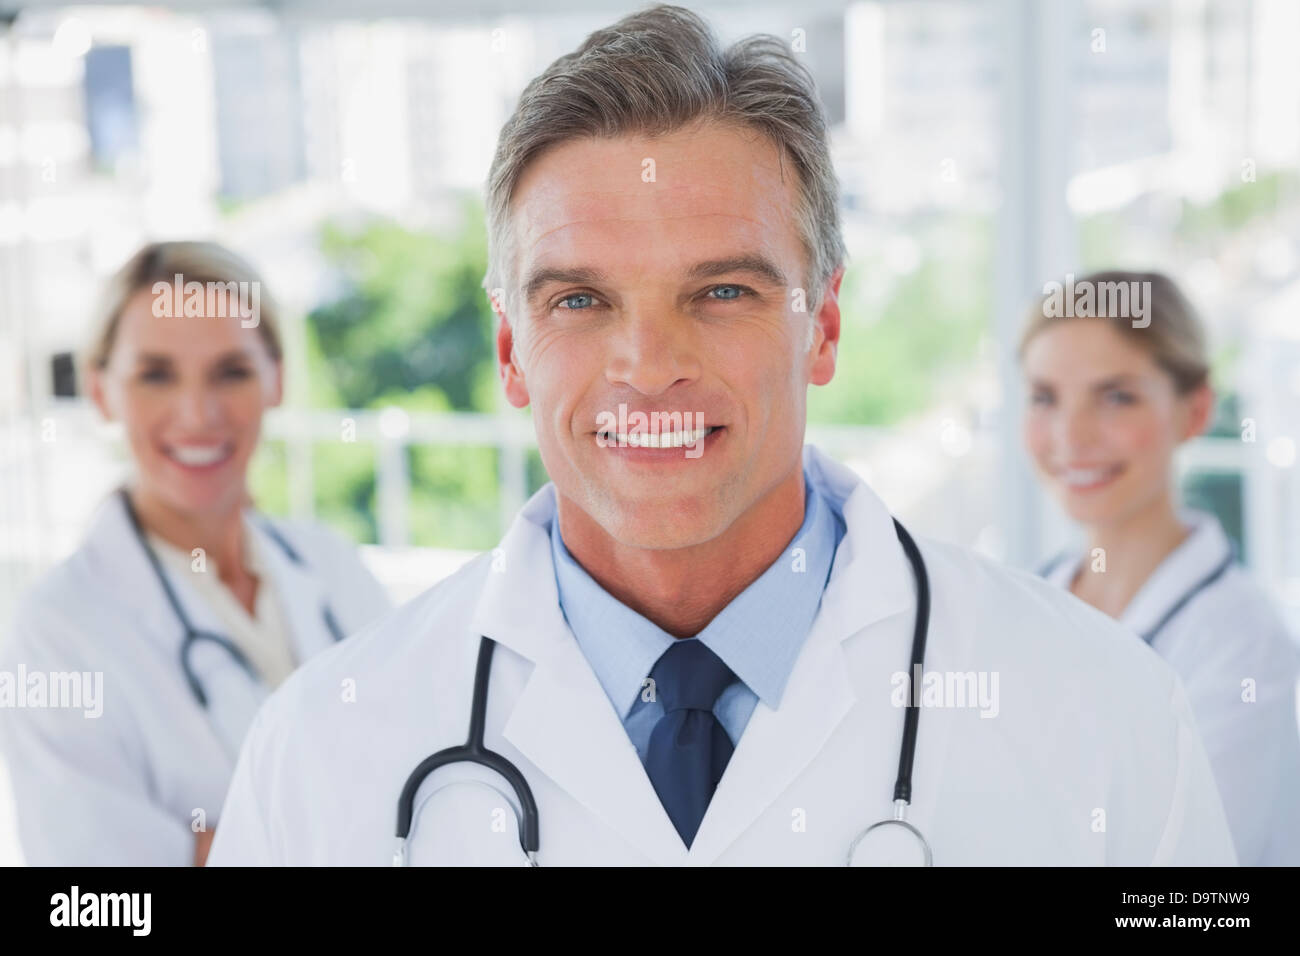 Charismatic doctor standing with colleagues Stock Photo